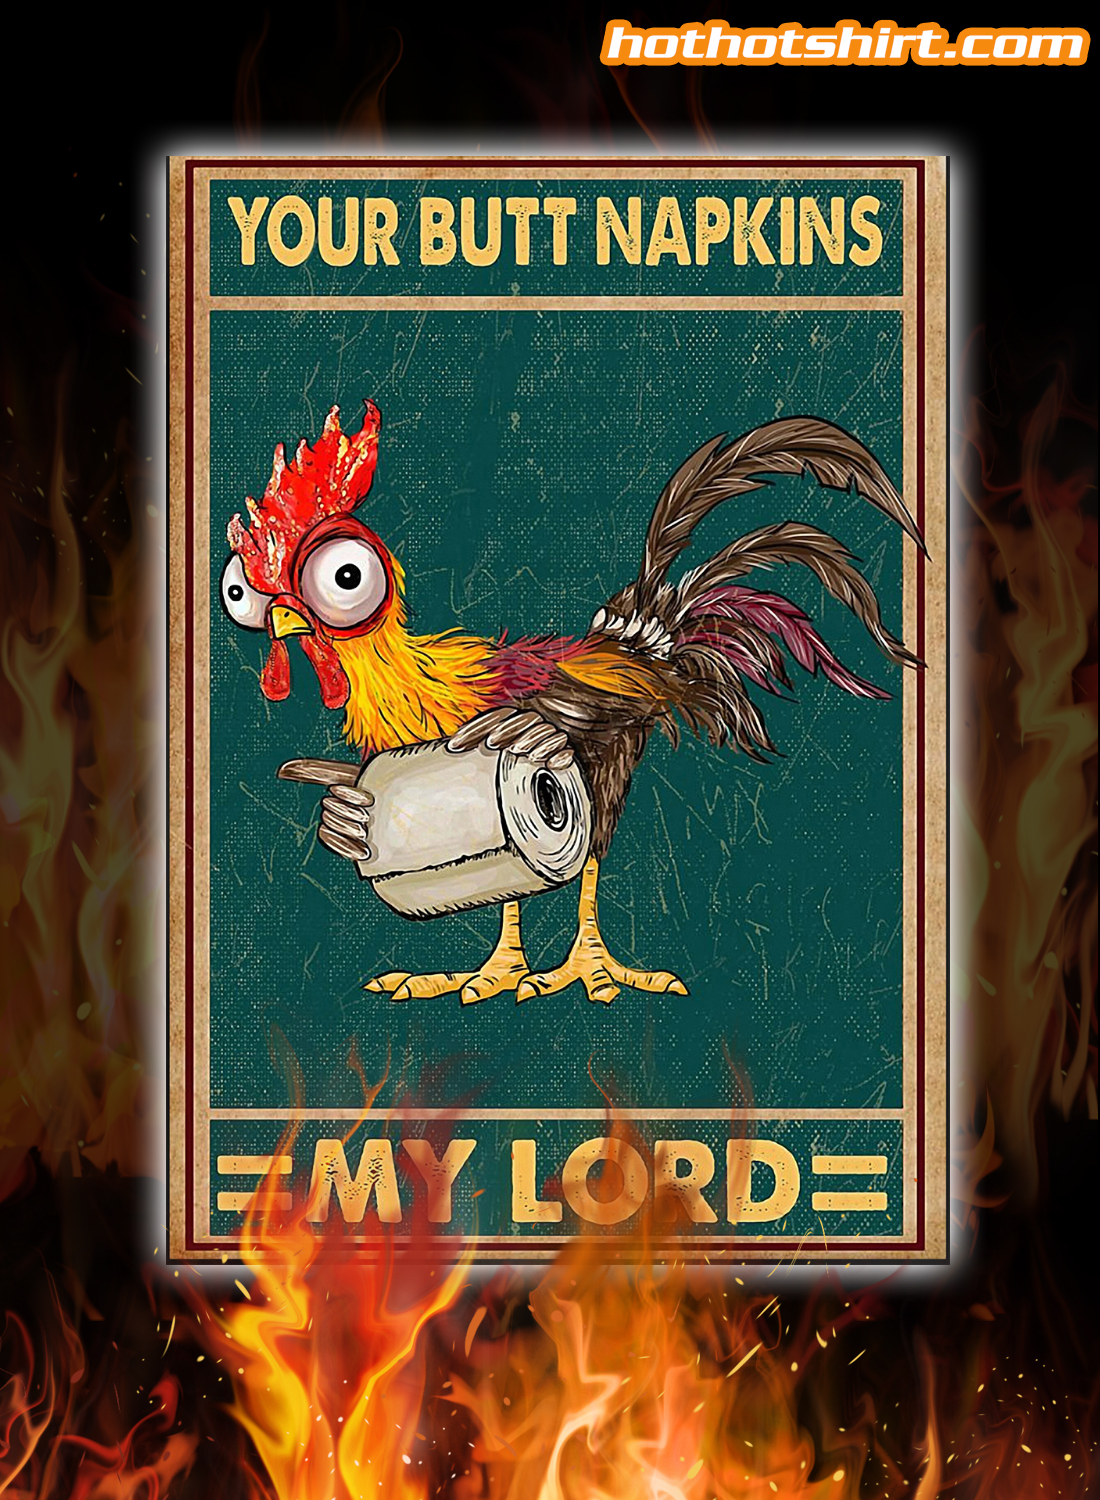 Chicken Hey Hey your butt napkins my lord poster